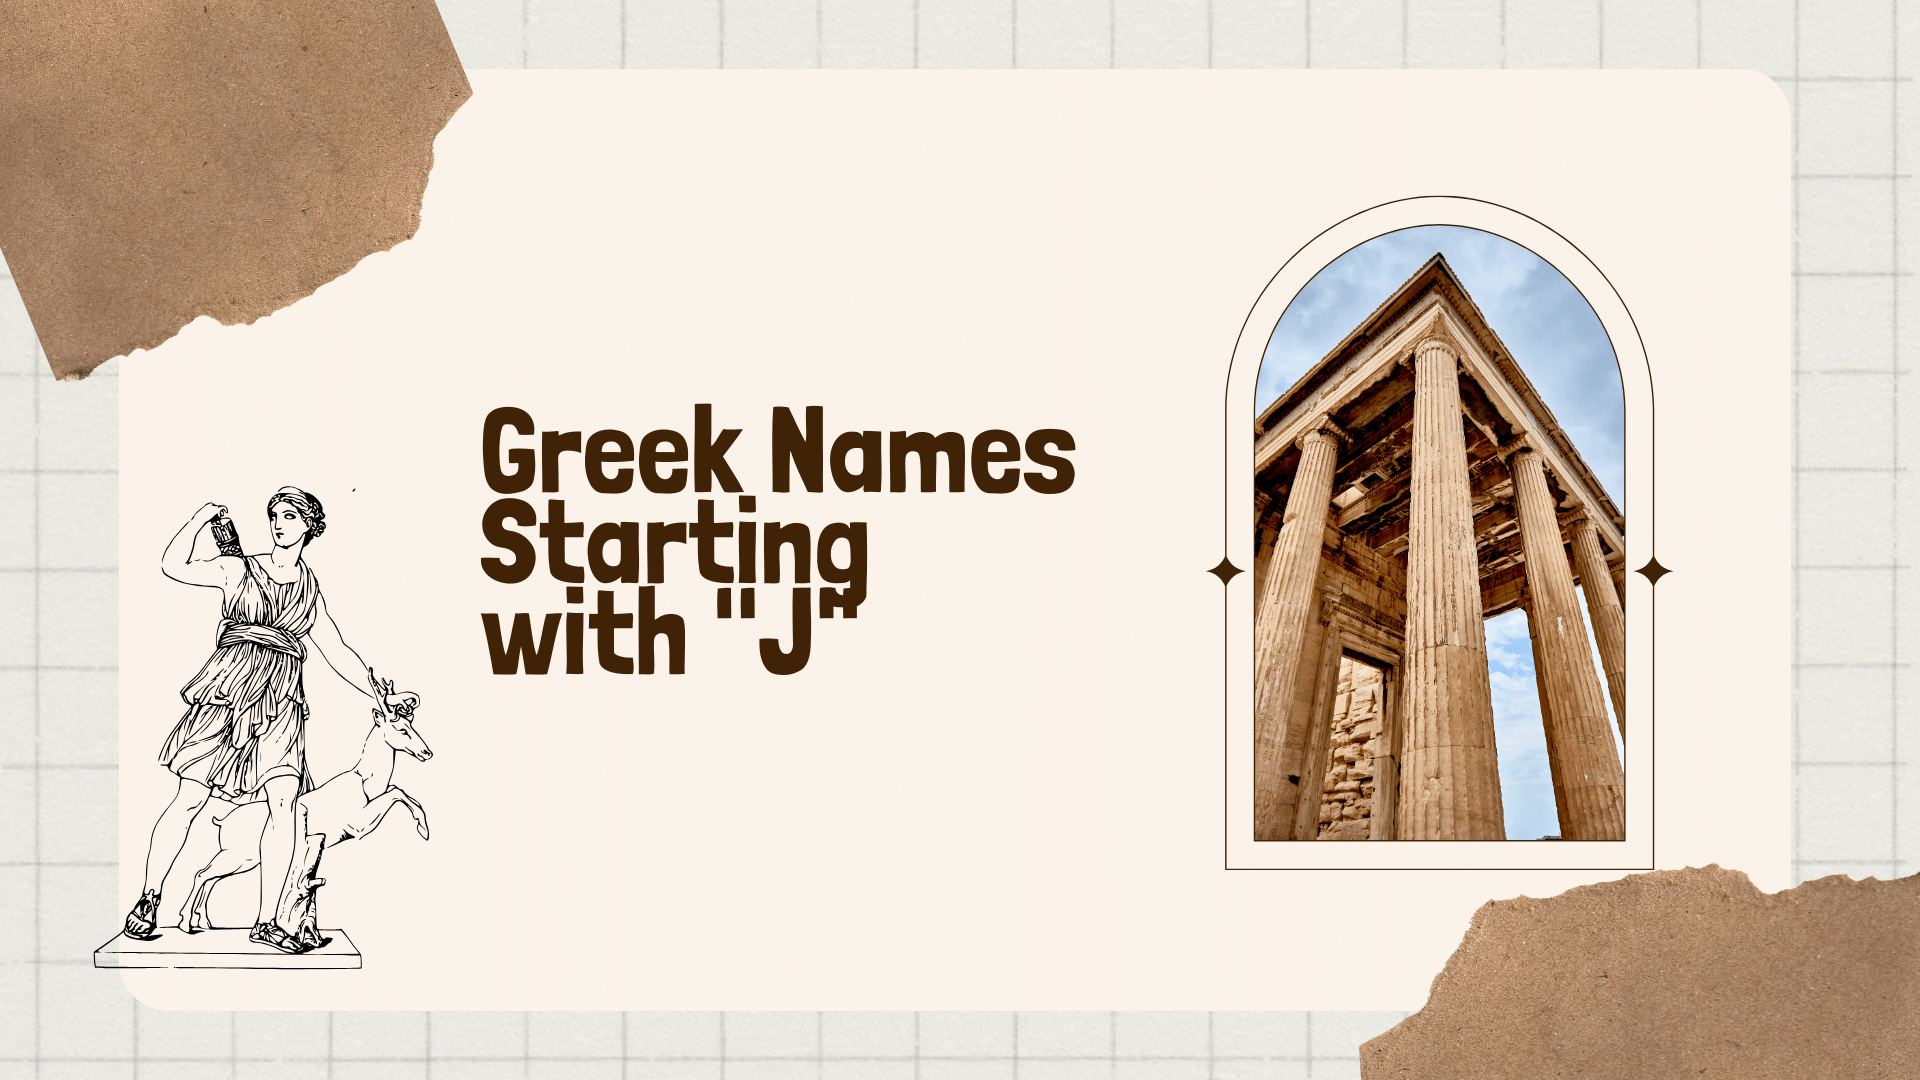 Greek Names Starting With "J"